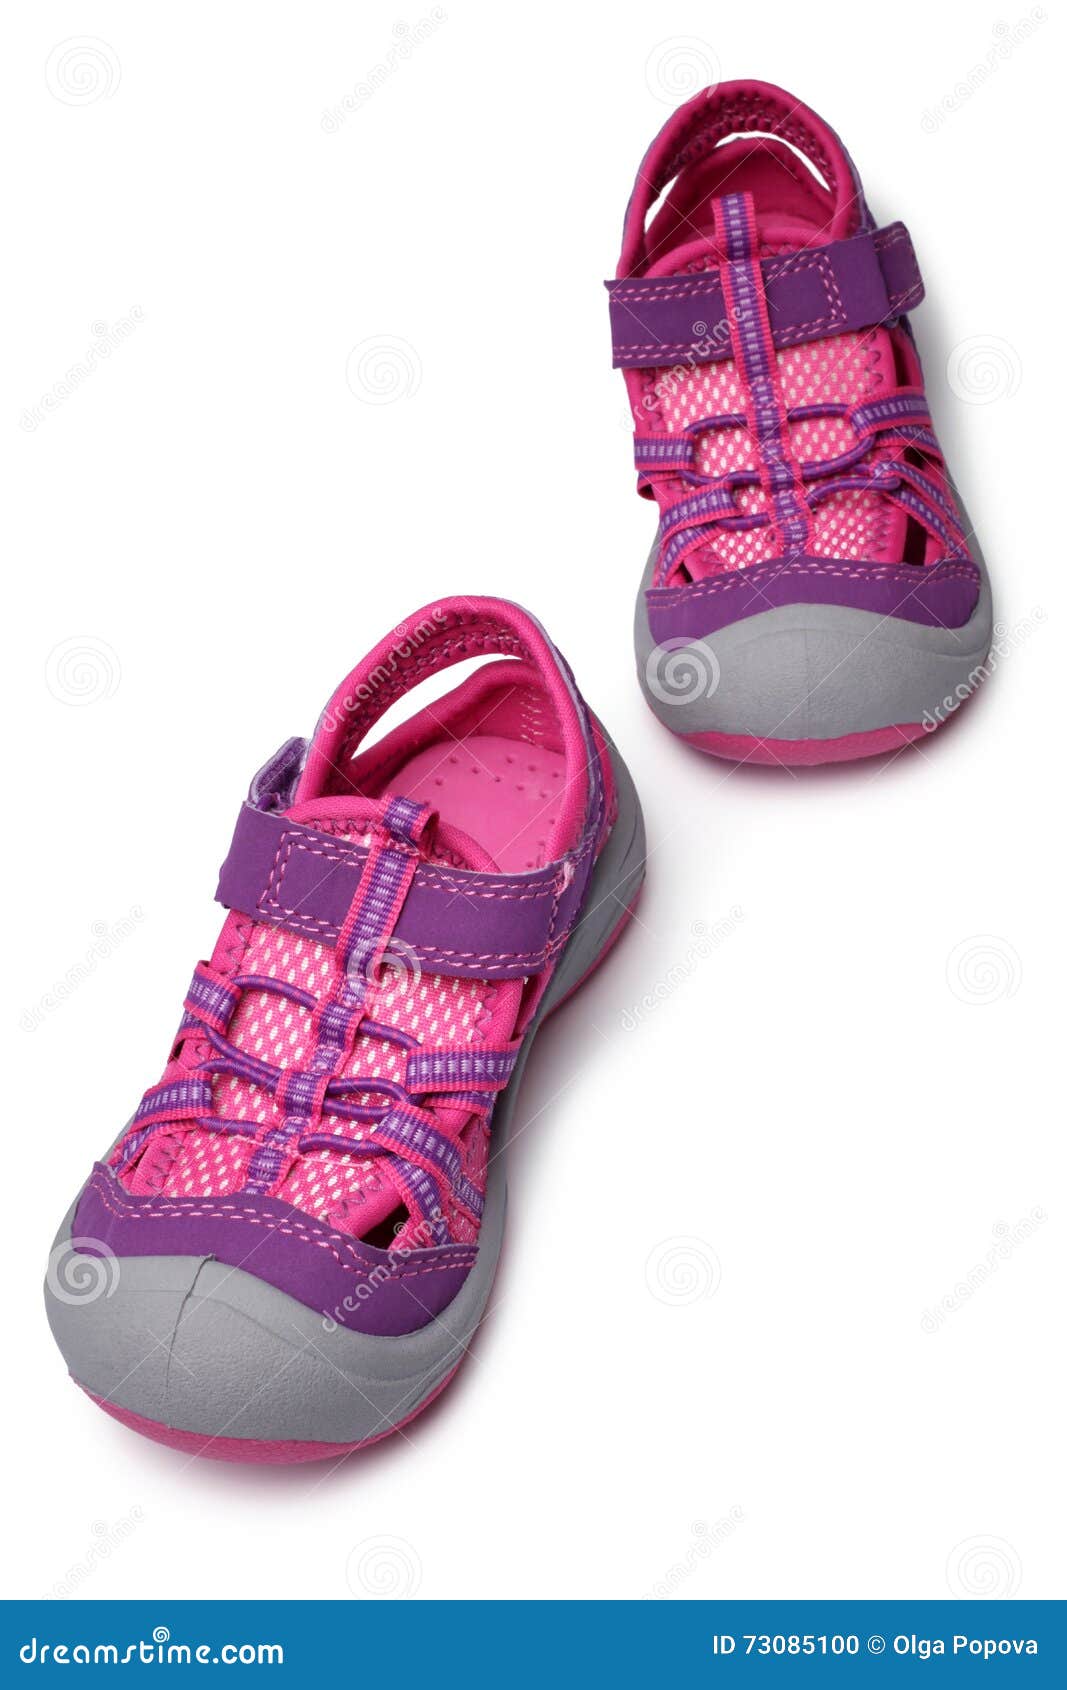 Baby girl shoes stock photo. Image of details, childhood - 73085100